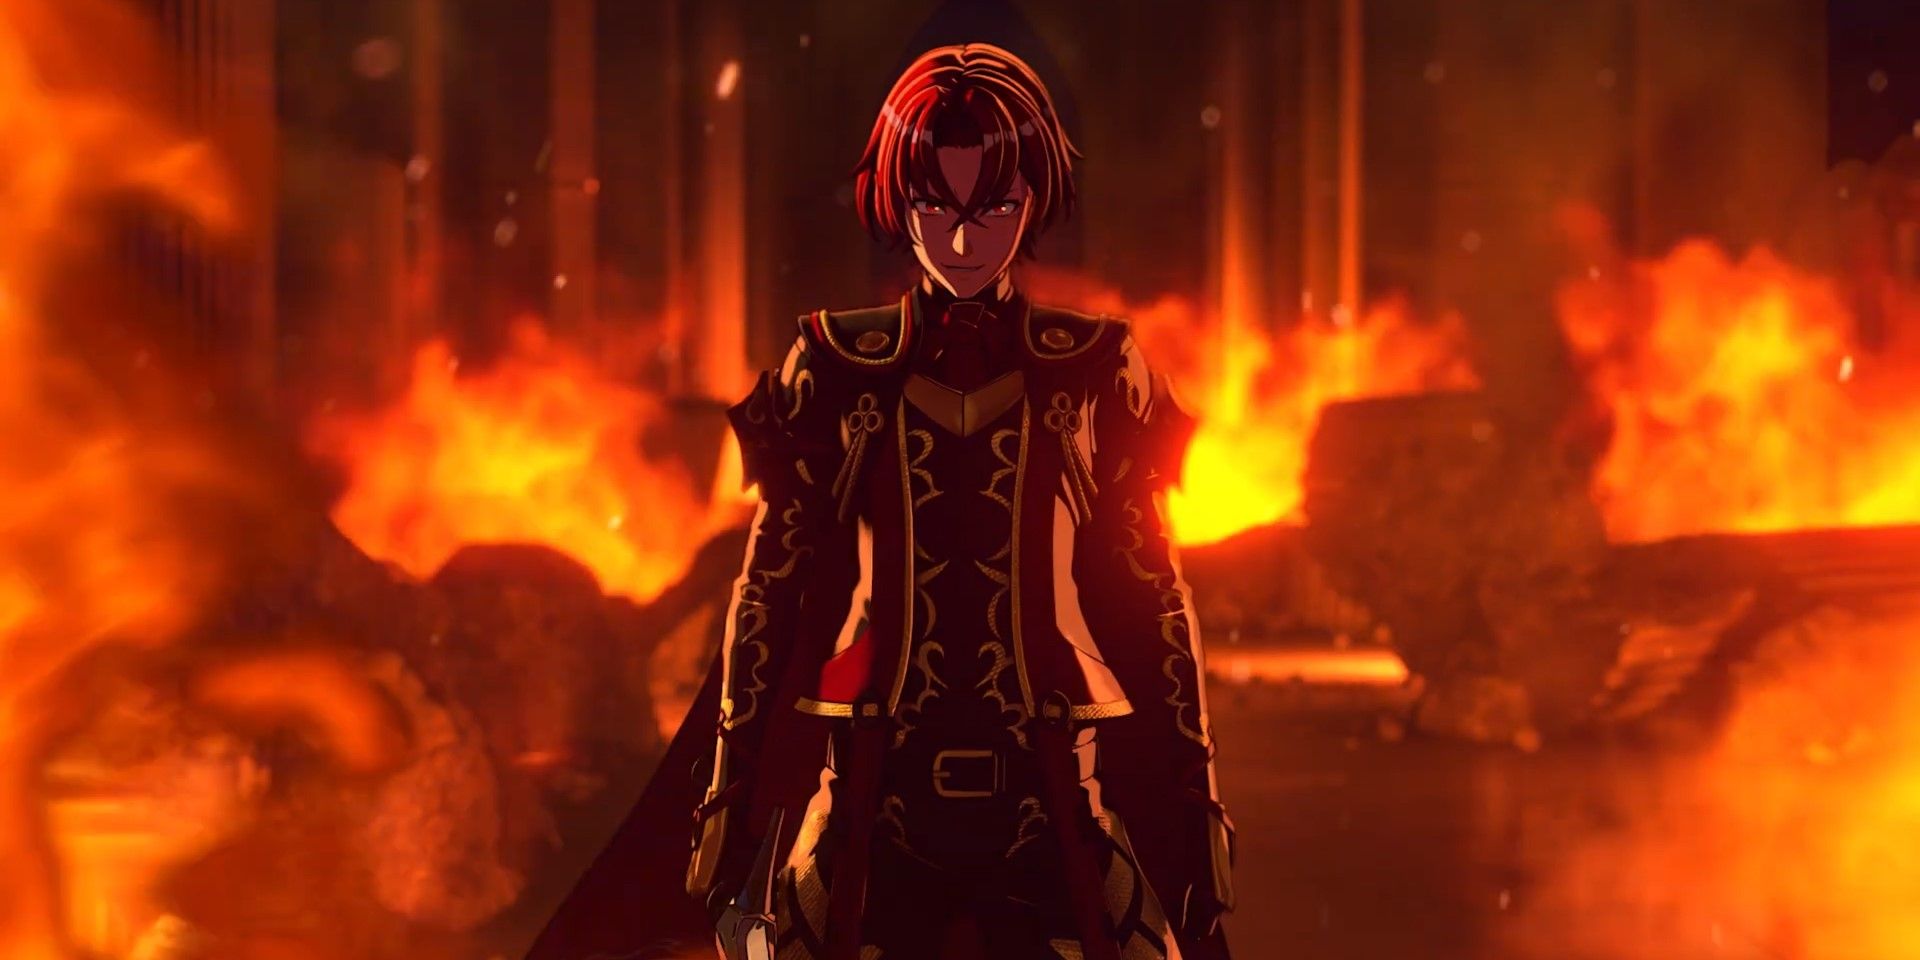 Alear standing in a burning castle with a sinister expression